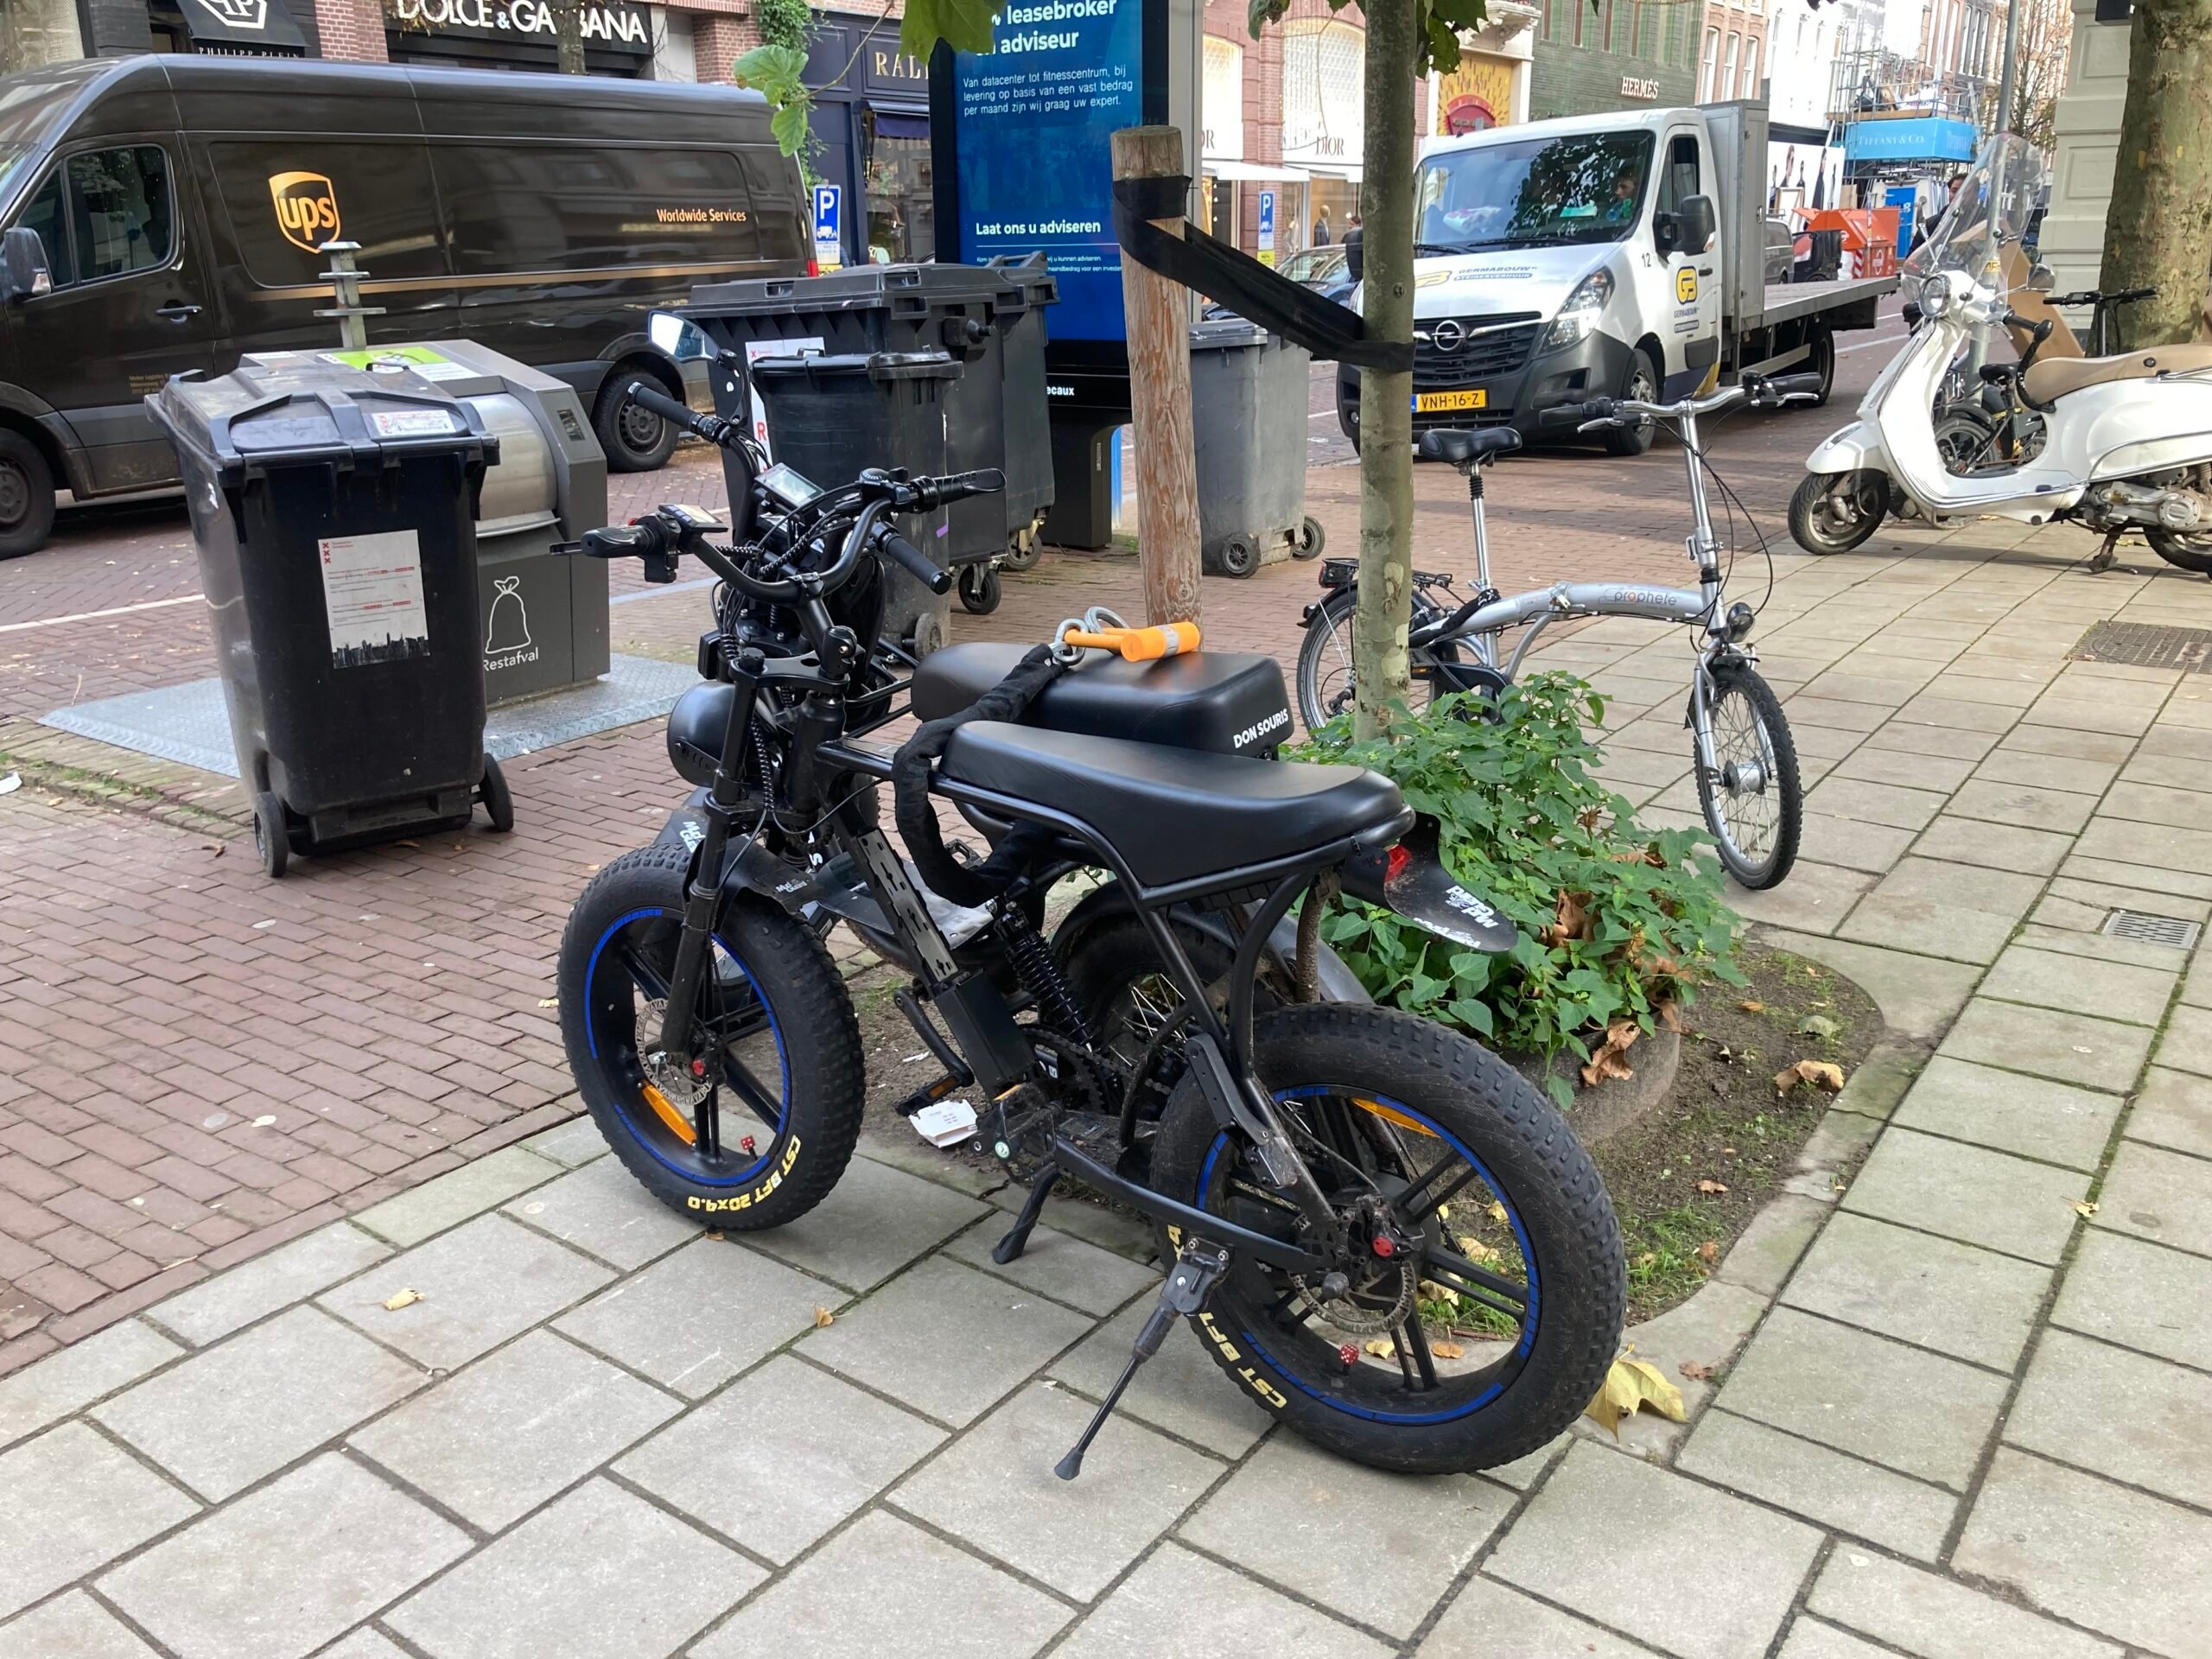 More than half of fatbikes in Amsterdam souped up, police find